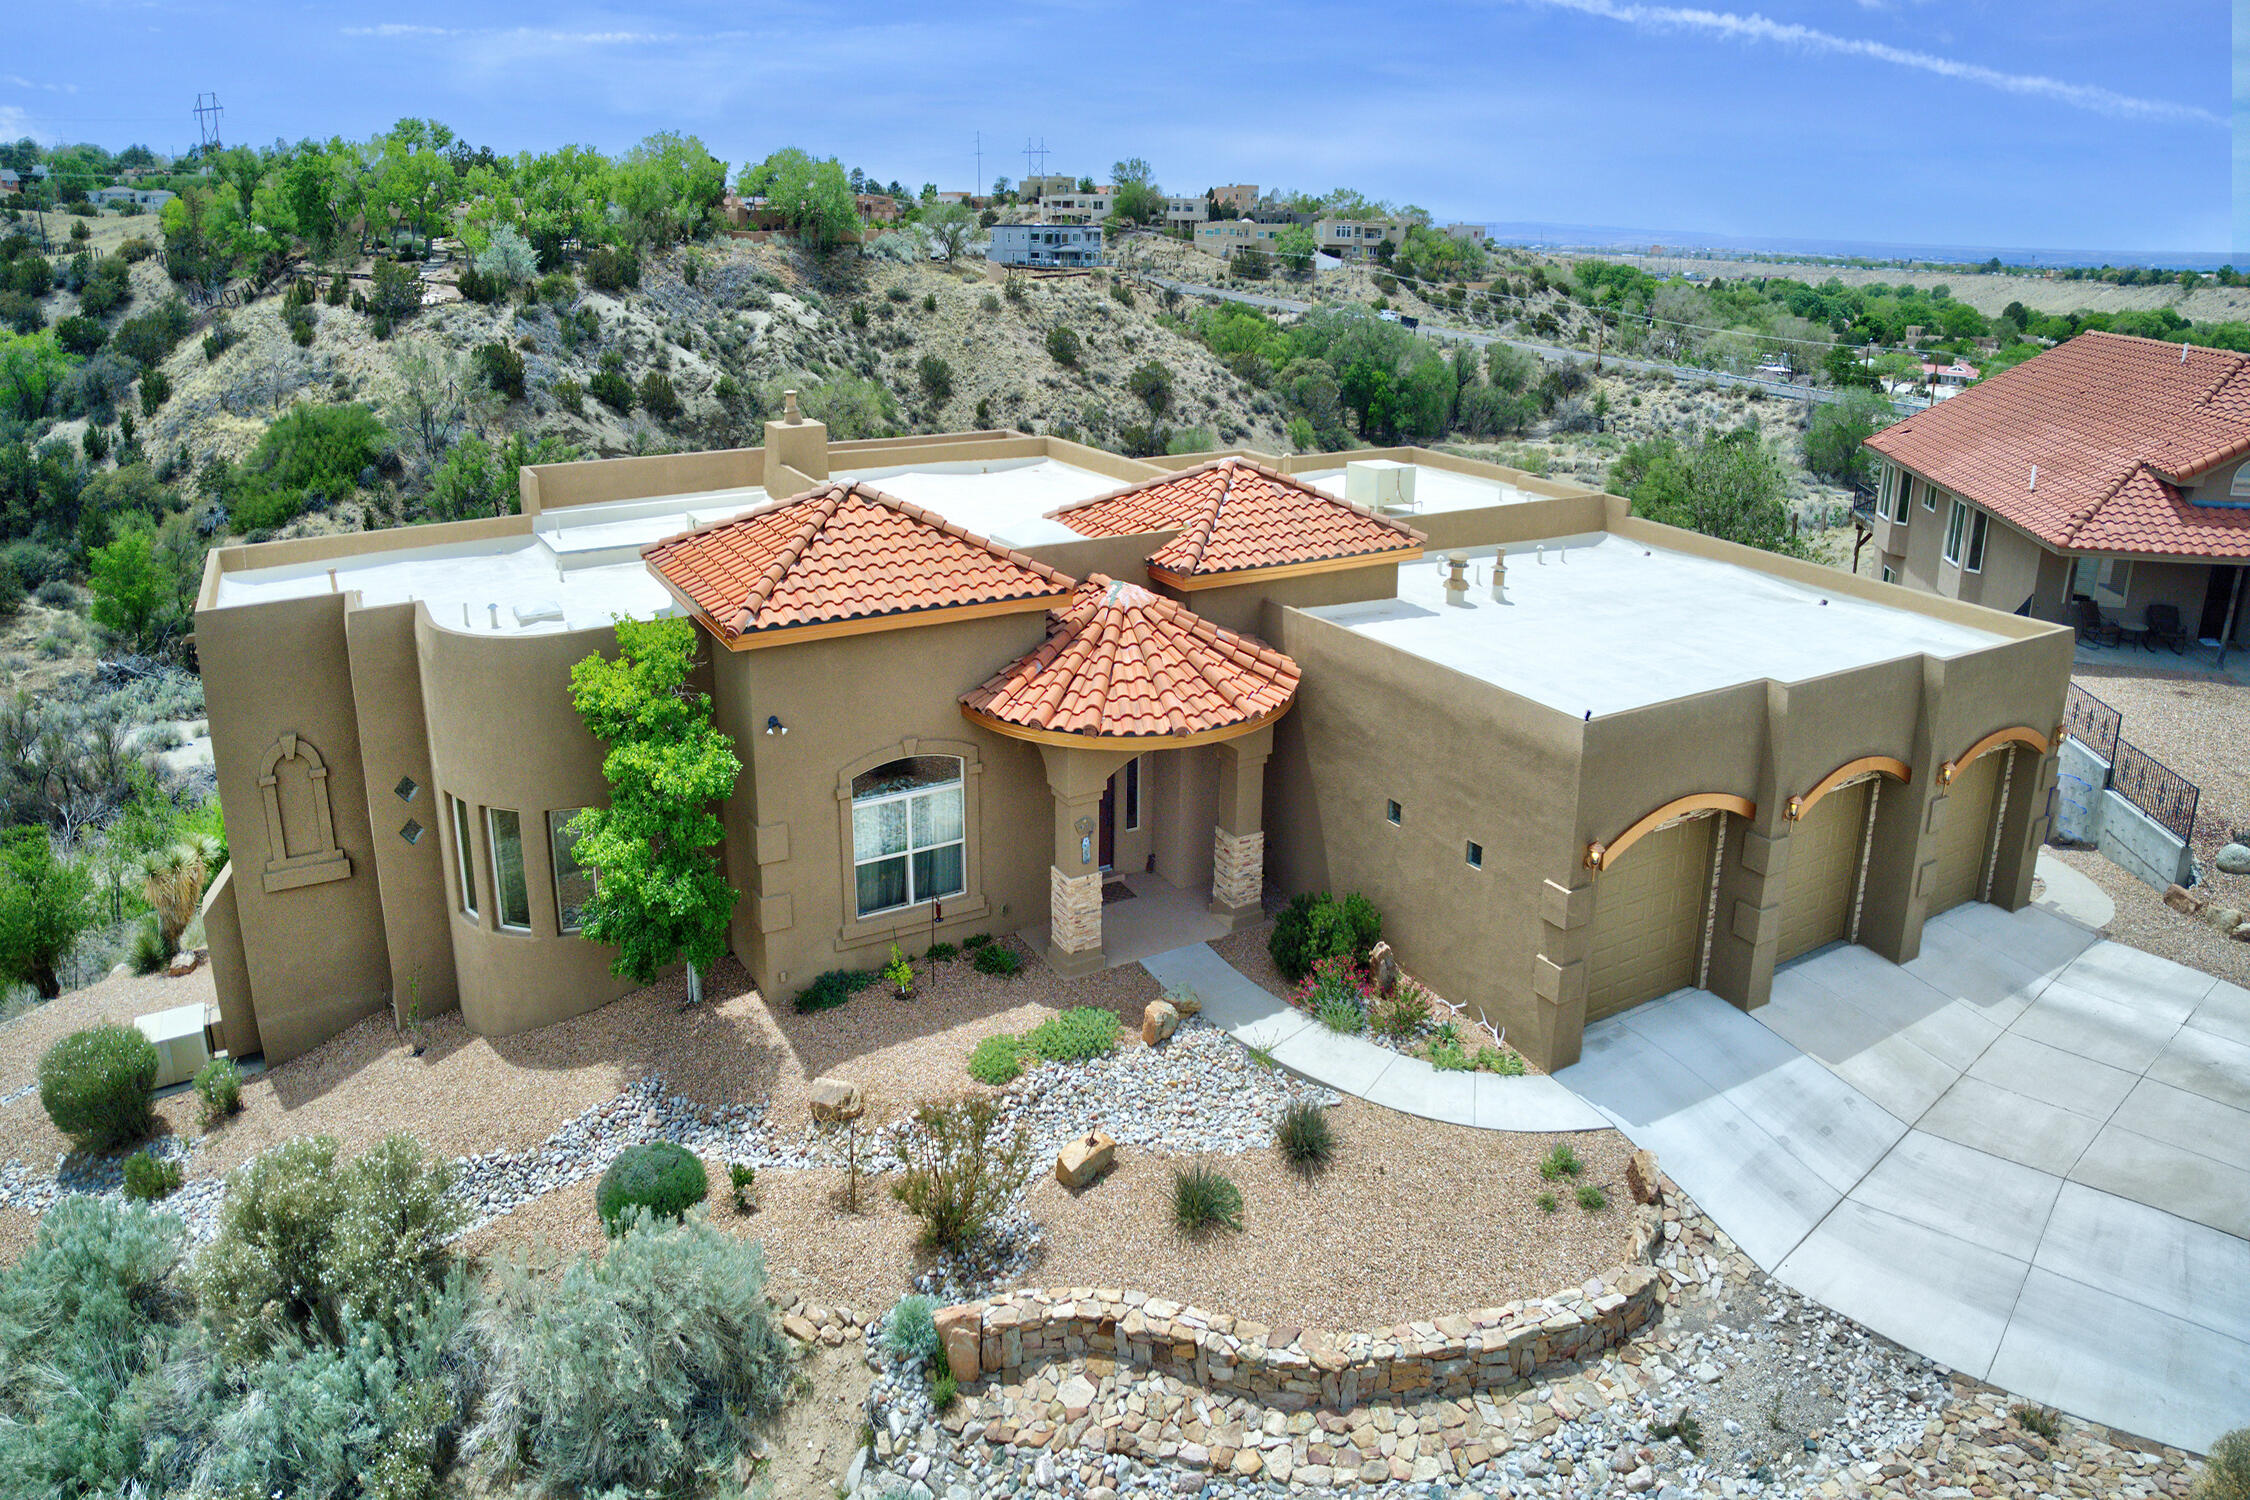 This custom-built OUTSTANDING home is luxury at its finest! Your private paradise, Hanging off the Buff for VIEWS, includes- Swim/Pool Spa, Sauna, and Theater!! Attention to detail is truly impeccable and very artistic. The home has a great layout and lots of natural light and great views and lots of storage.   Open floorplan includes a grand living area with wall of windows, and it opens to a view deck with grill and Dream Kitchen you just must see!  Luxurious Owner Suite with a spacious bath and 15 x 6.10 walk-in closet! Plus, a 2nd Separated Owner Suite, 2 laundry rooms and an office, 3 car garage + so much more! You'll enjoy all the luxury amenities.  The home backs to open space and has incredible views.  Come see this one-of-a-kind home in Four Hills with Golf Course and Country Club